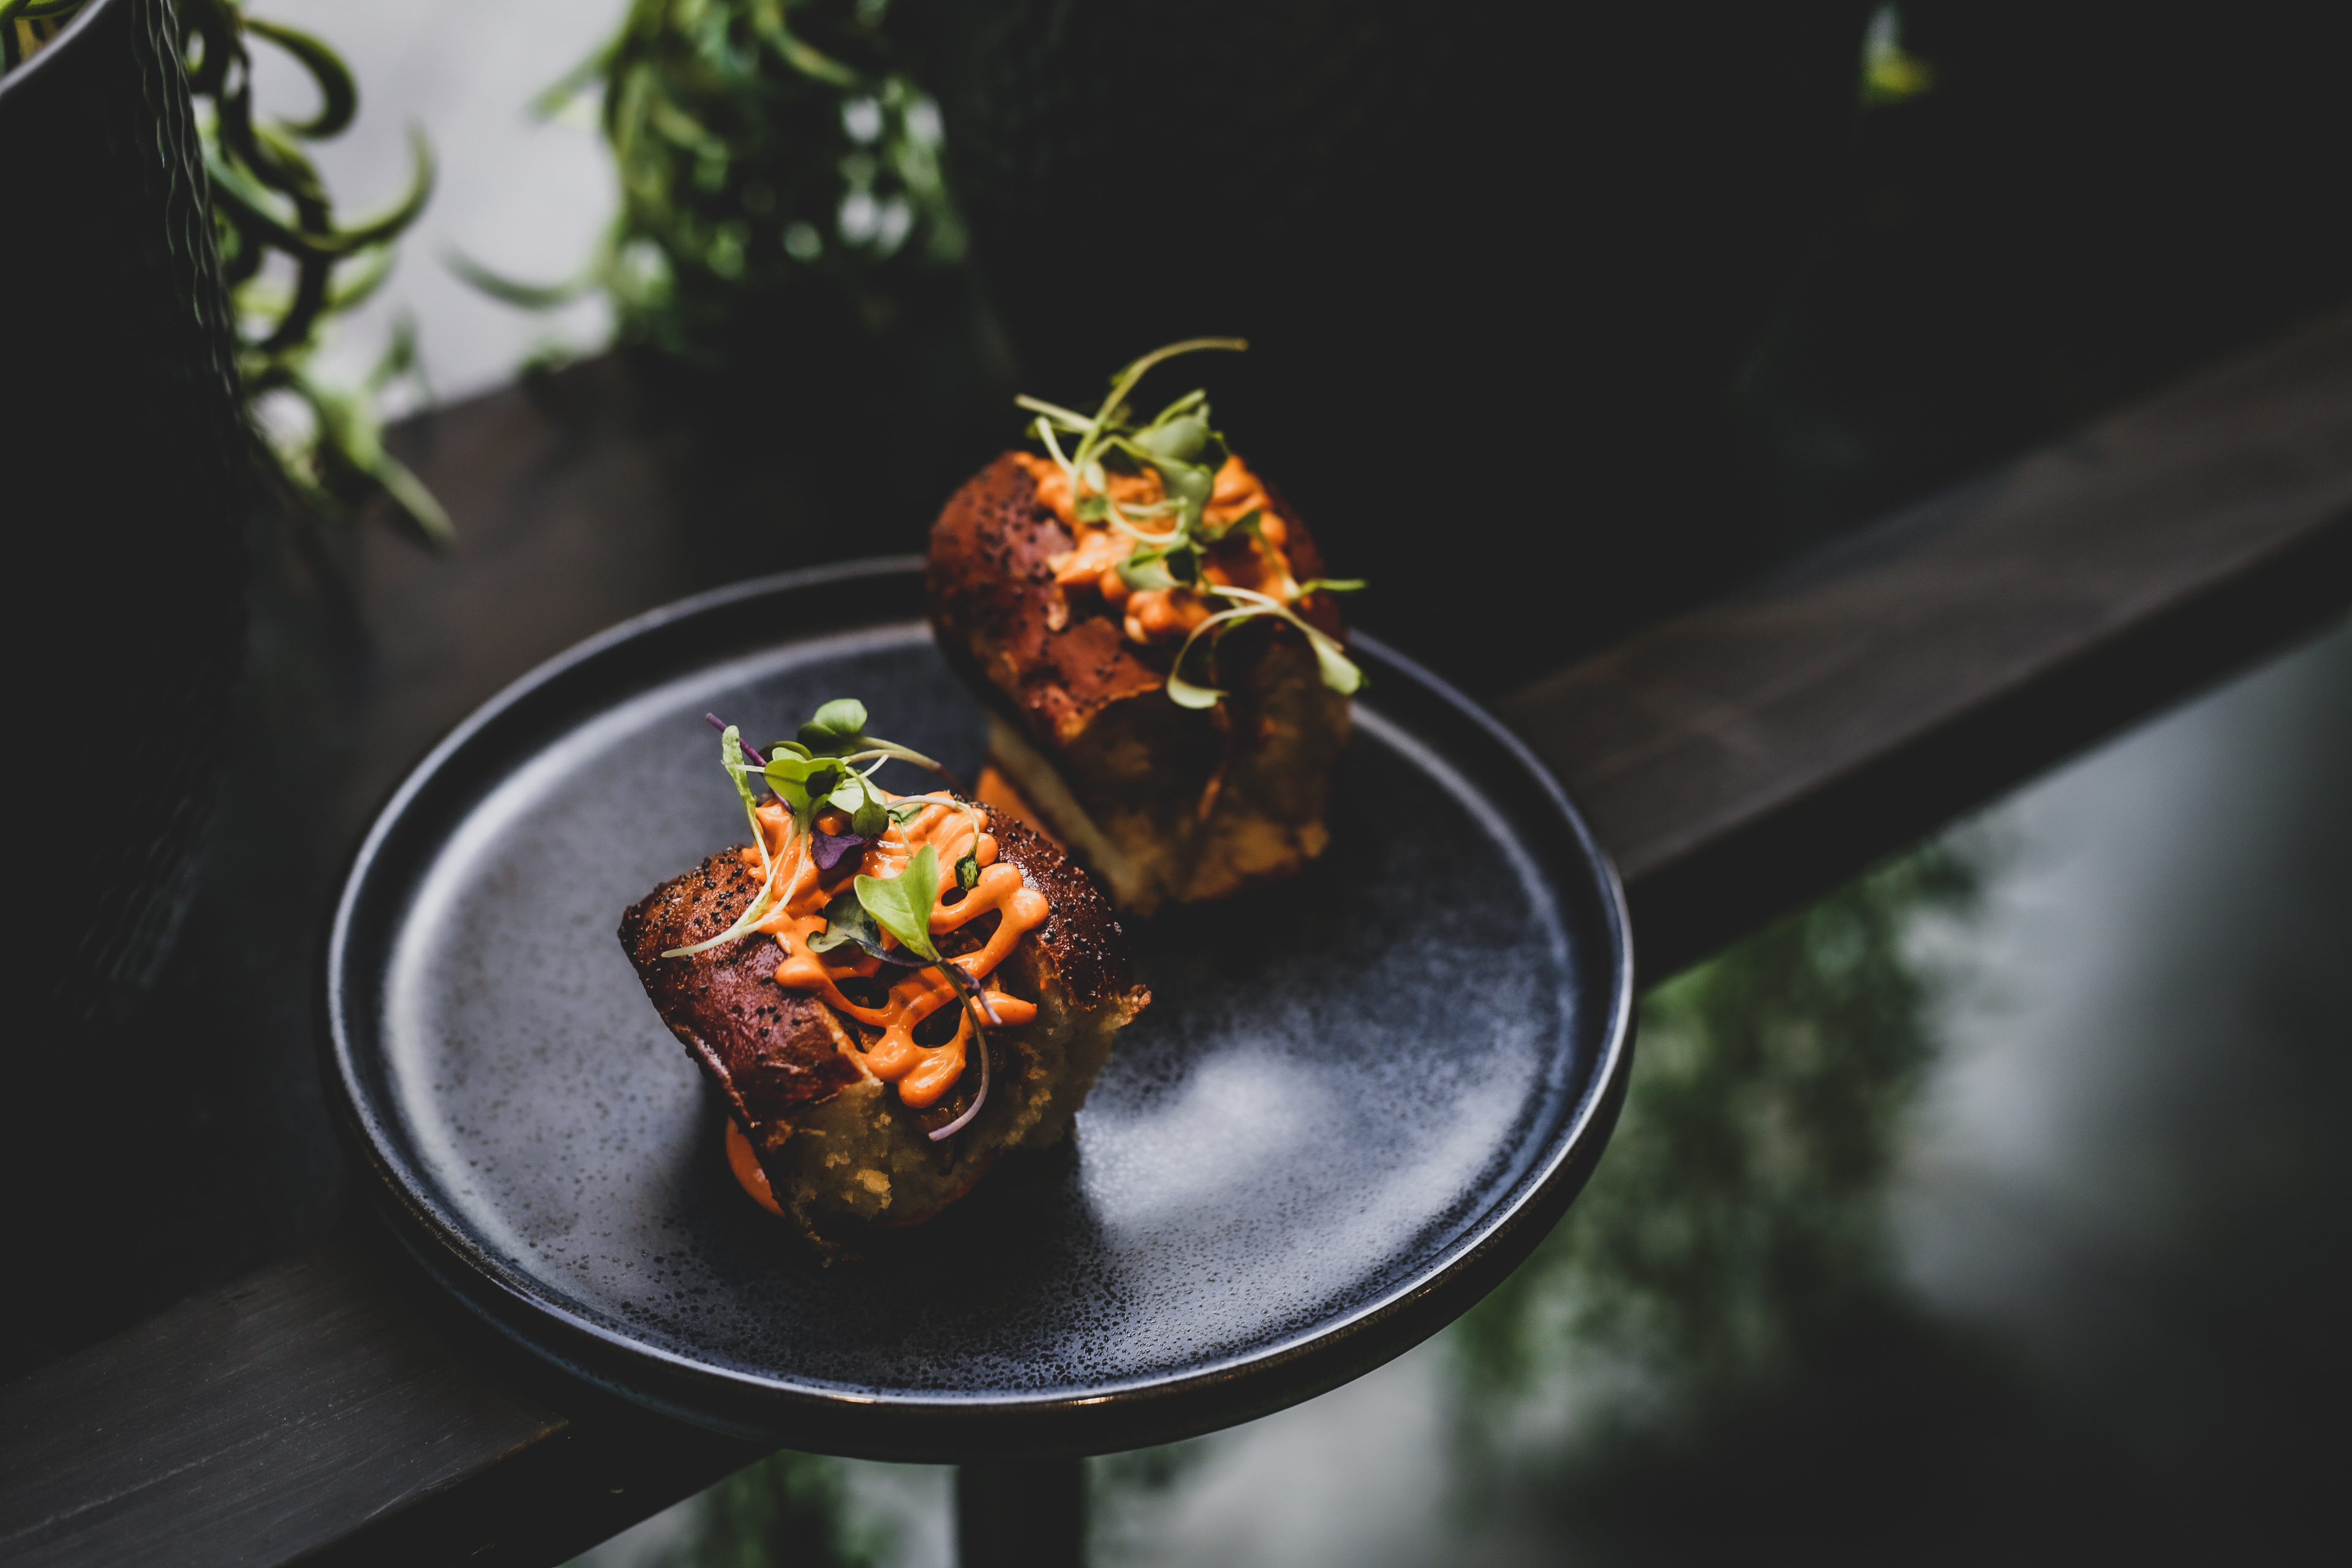 Brioche bread stuffed with frayed ribs and smoked chipotle mayonnaise